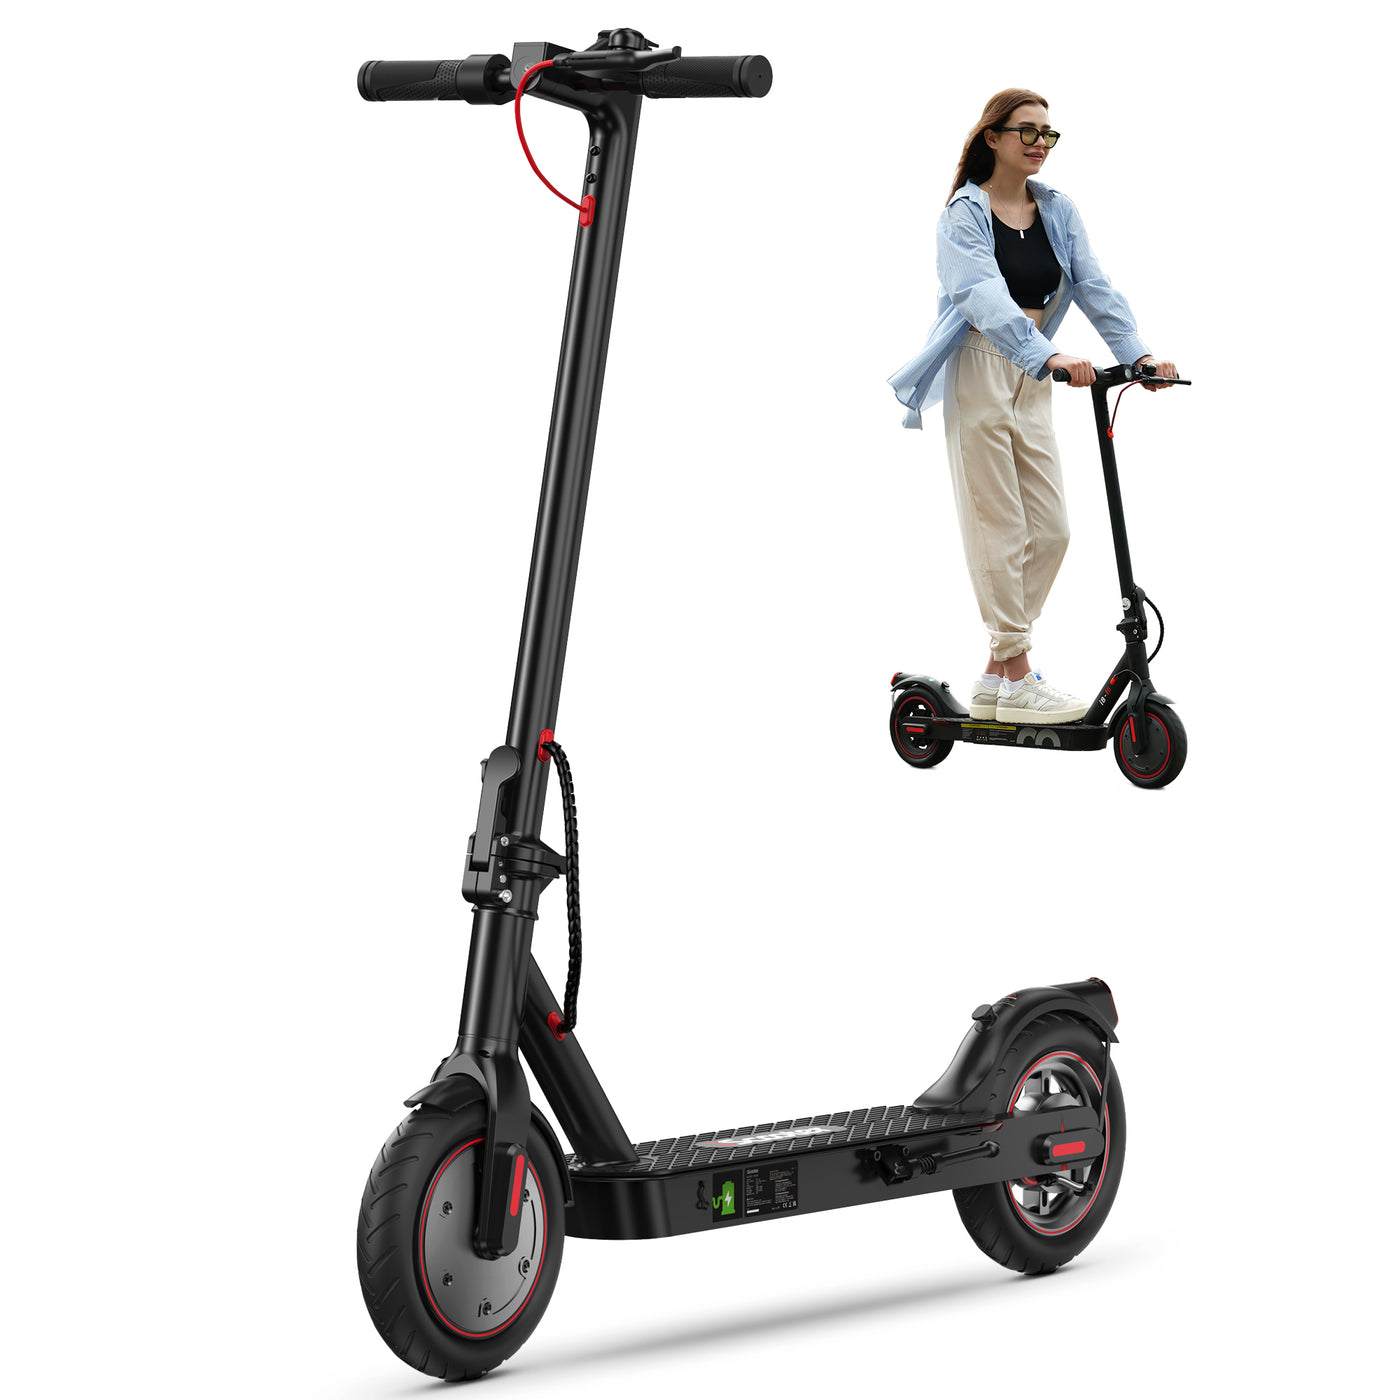 iScooter i8 Electric Scooter